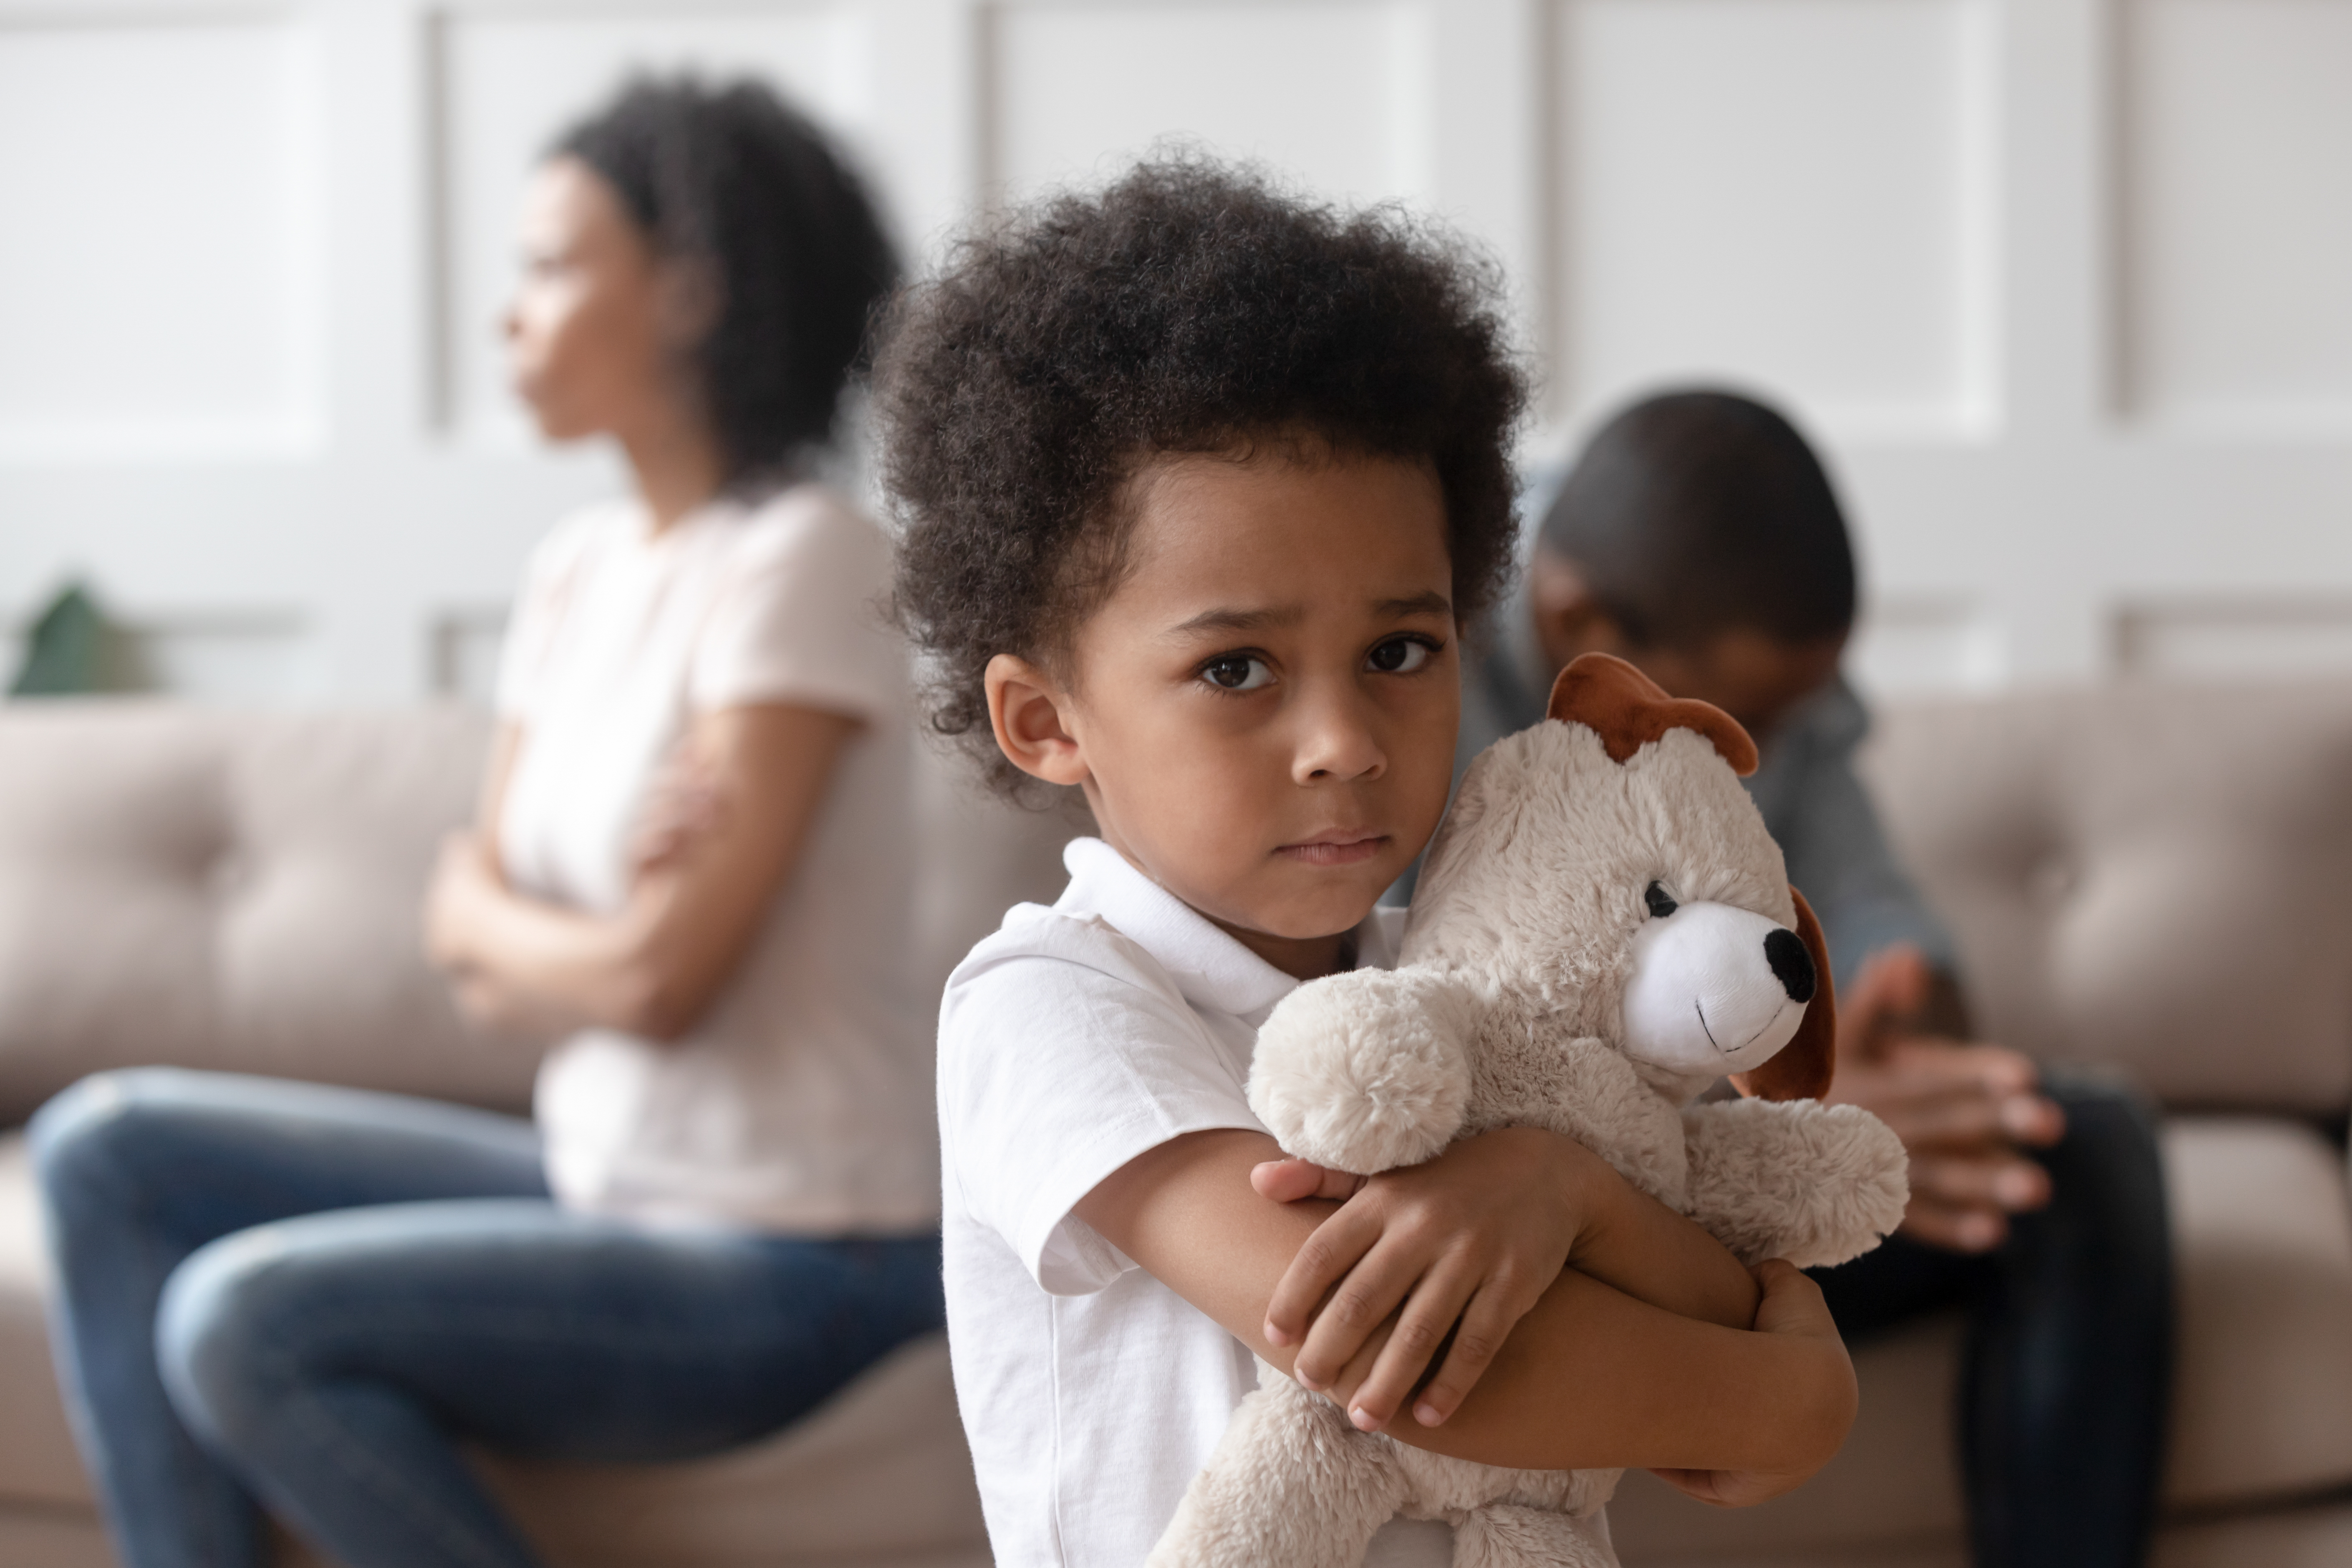 A sad Black child holding a teddy bear while a man and a woman turn their backs on each other in the background.  | Source: Shutterstock